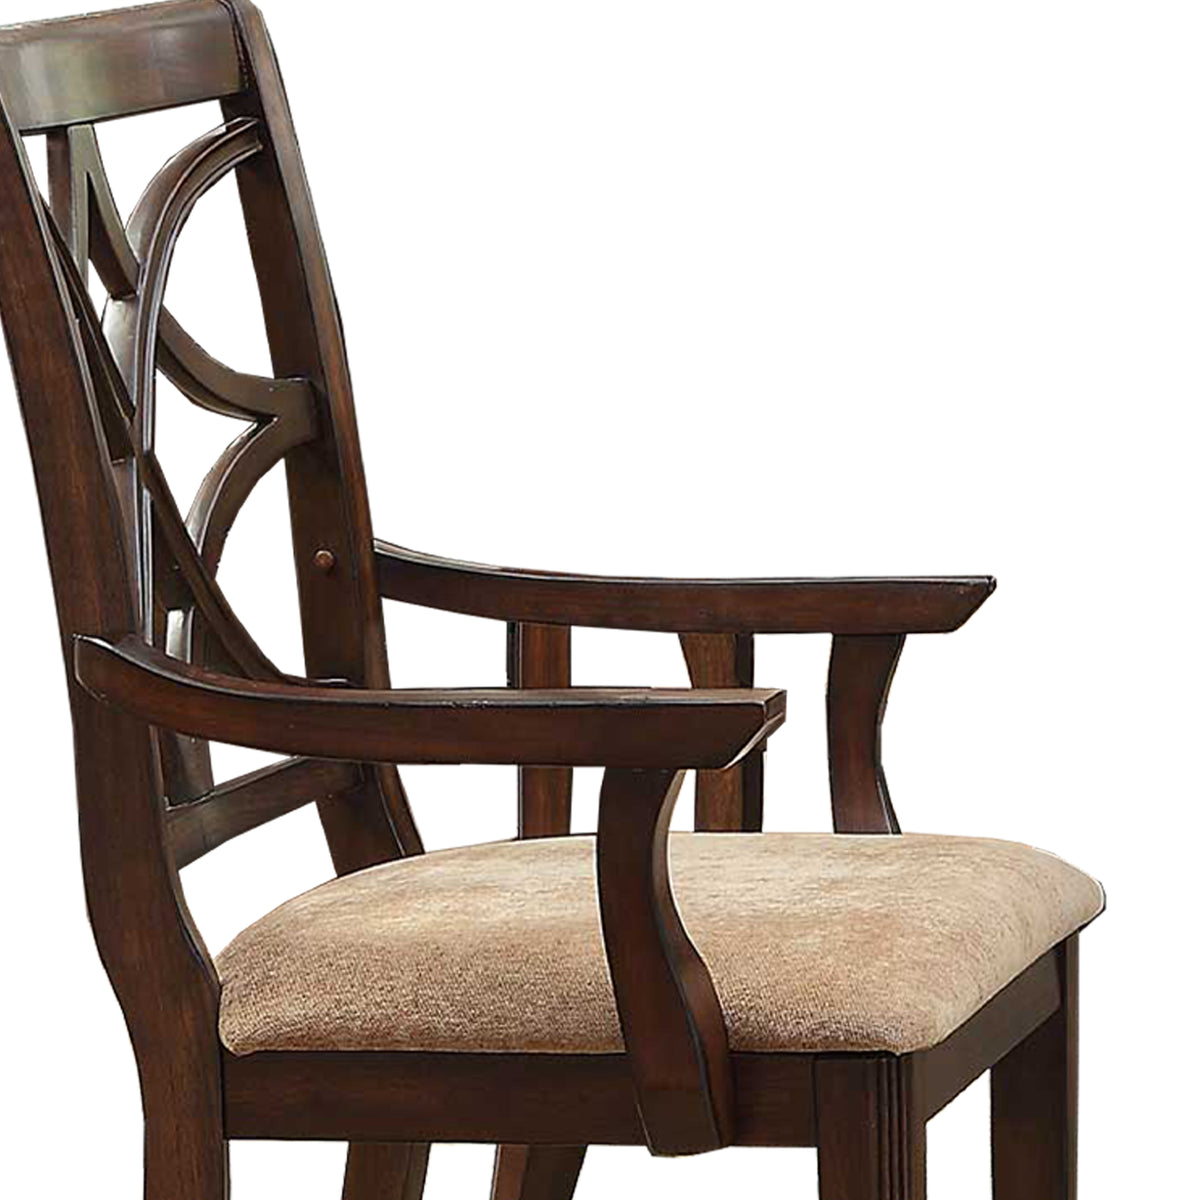 Solid Wooden Arm Chair With Beige Fabric Seat, Cherry Brown & Beige (Set Of 2)